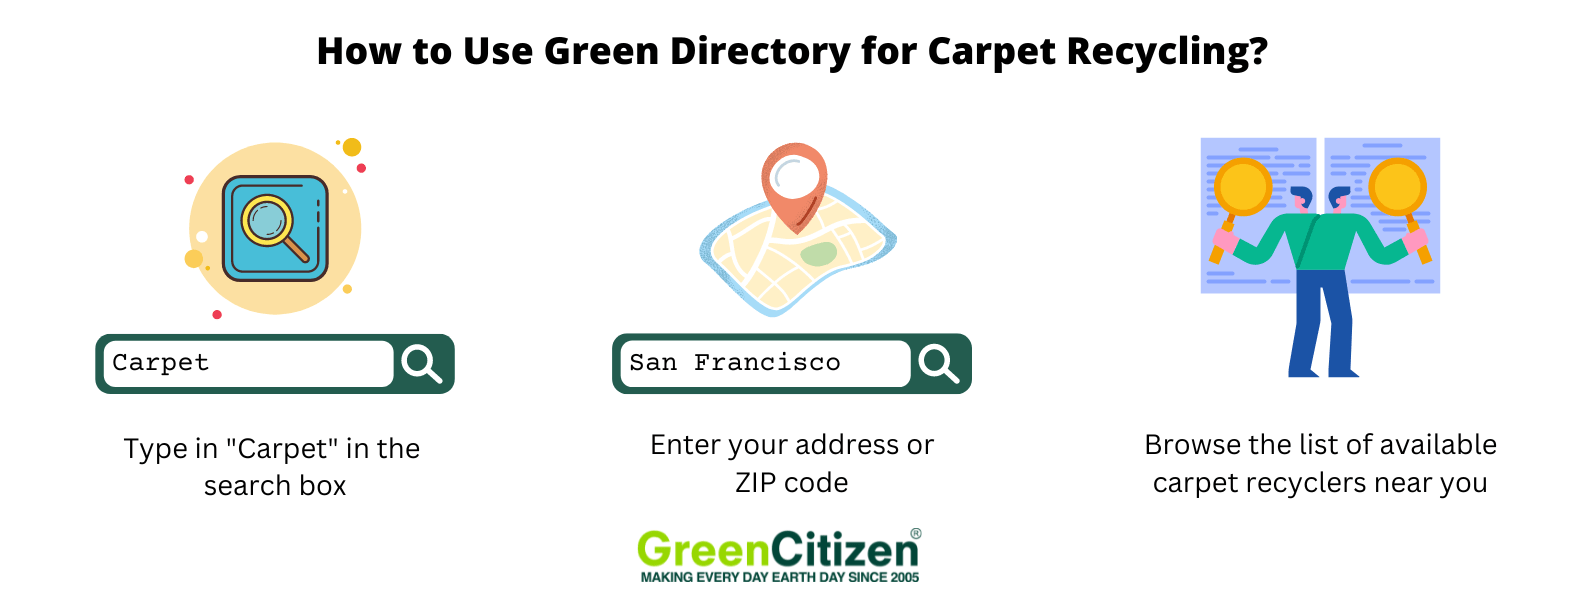 Green Directory Carpet Recycling